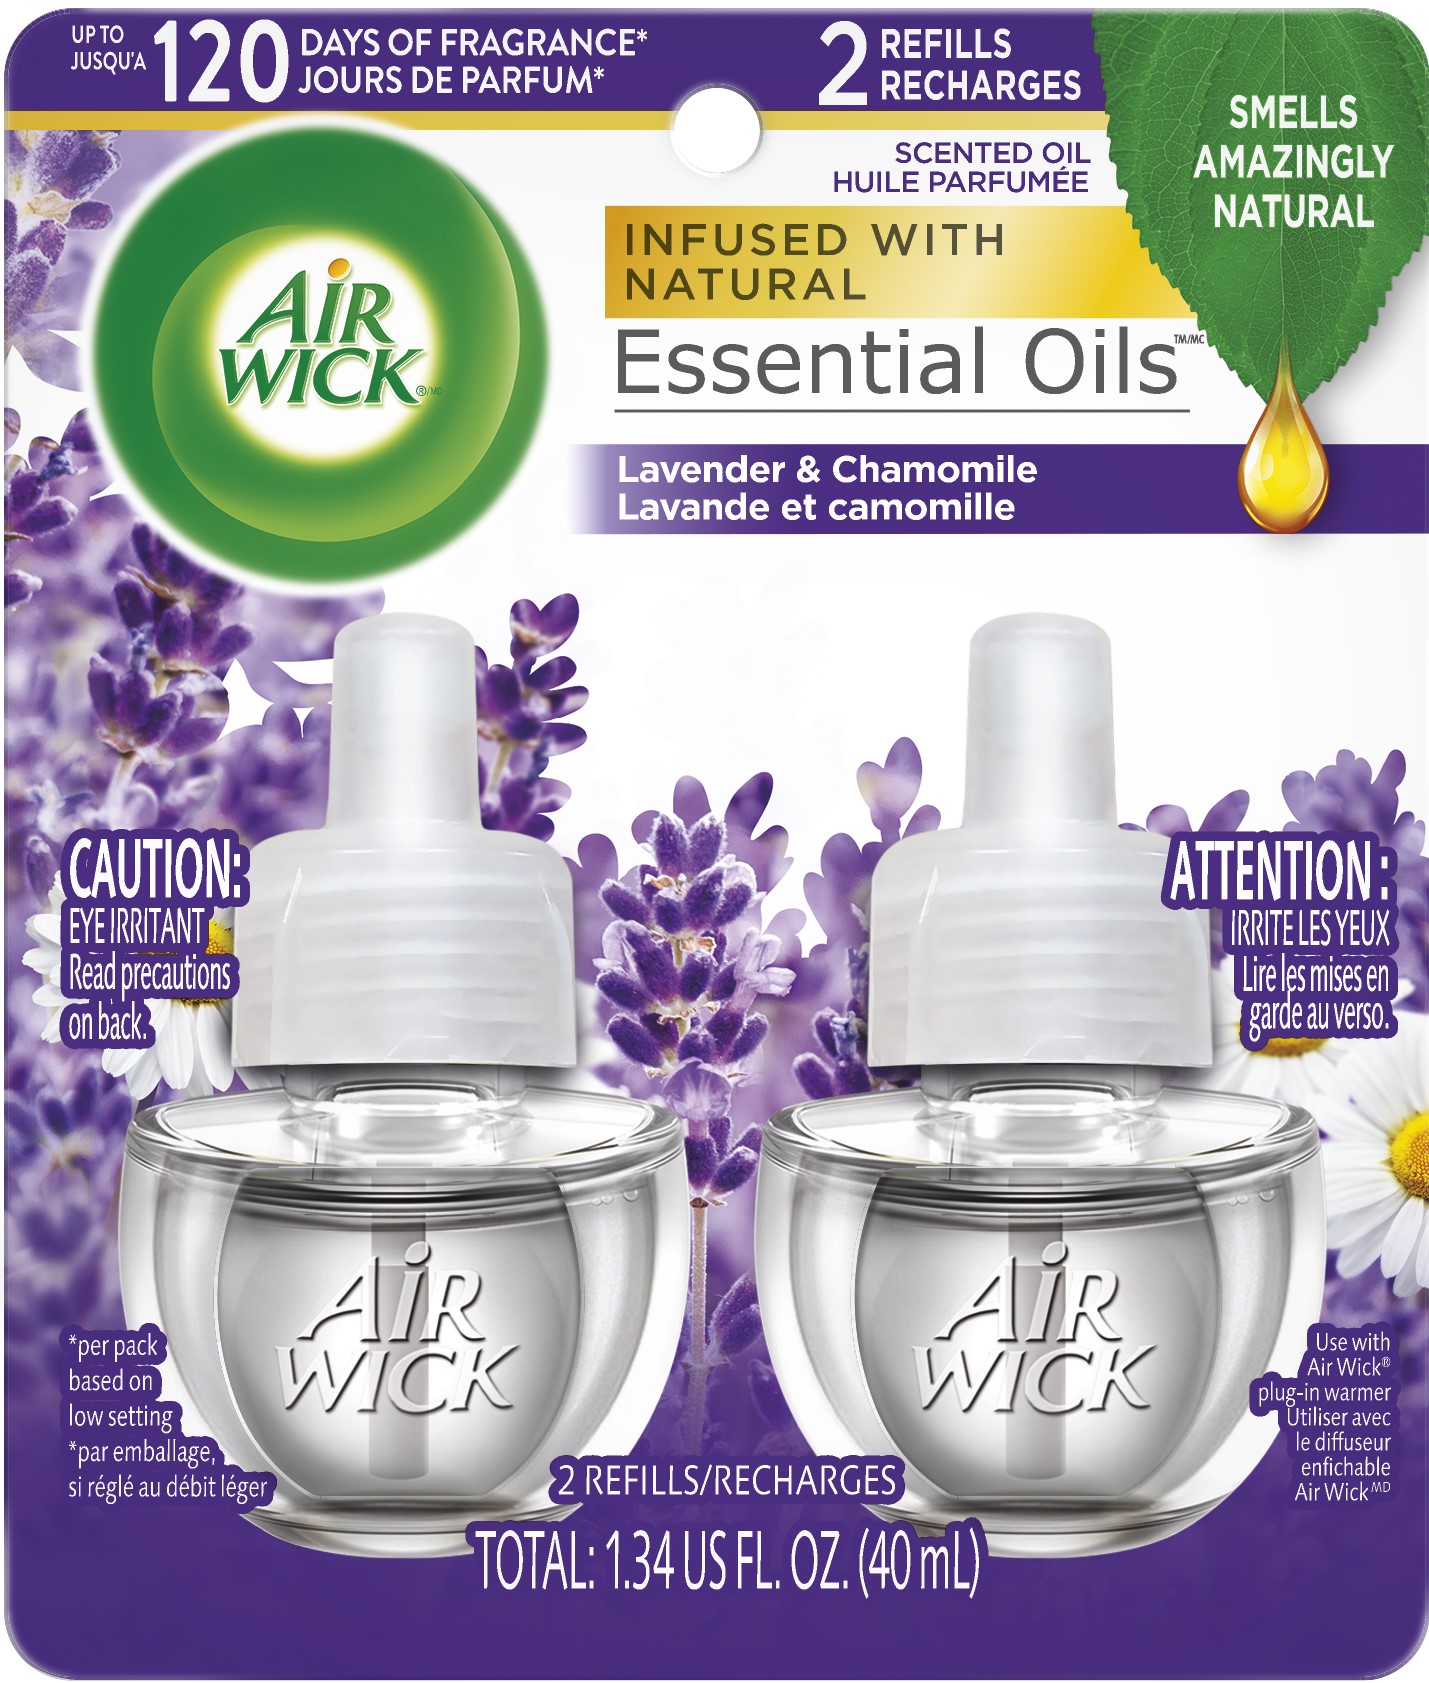 Air Wick Plug in Scented Oil Refill, 2ct, Lavender and Chamomile, Air Freshener, Essential Oils - image 1 of 12